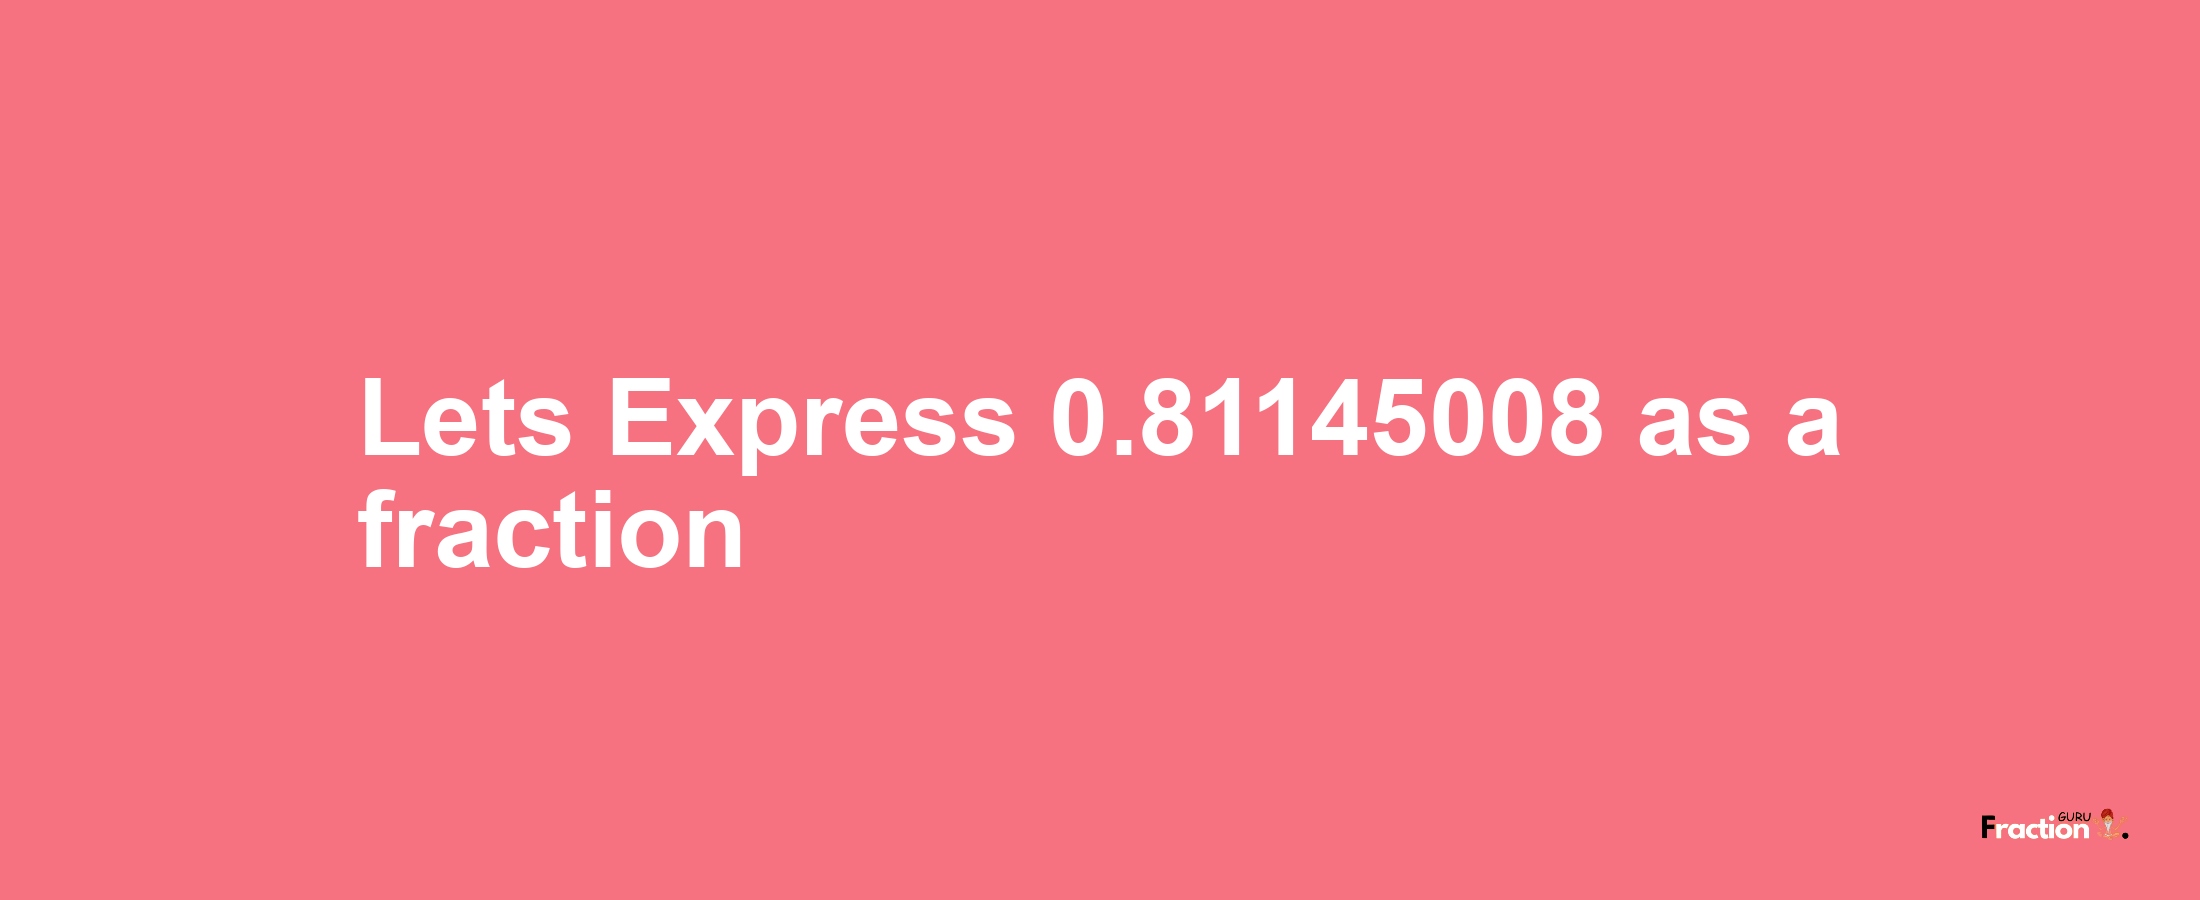 Lets Express 0.81145008 as afraction